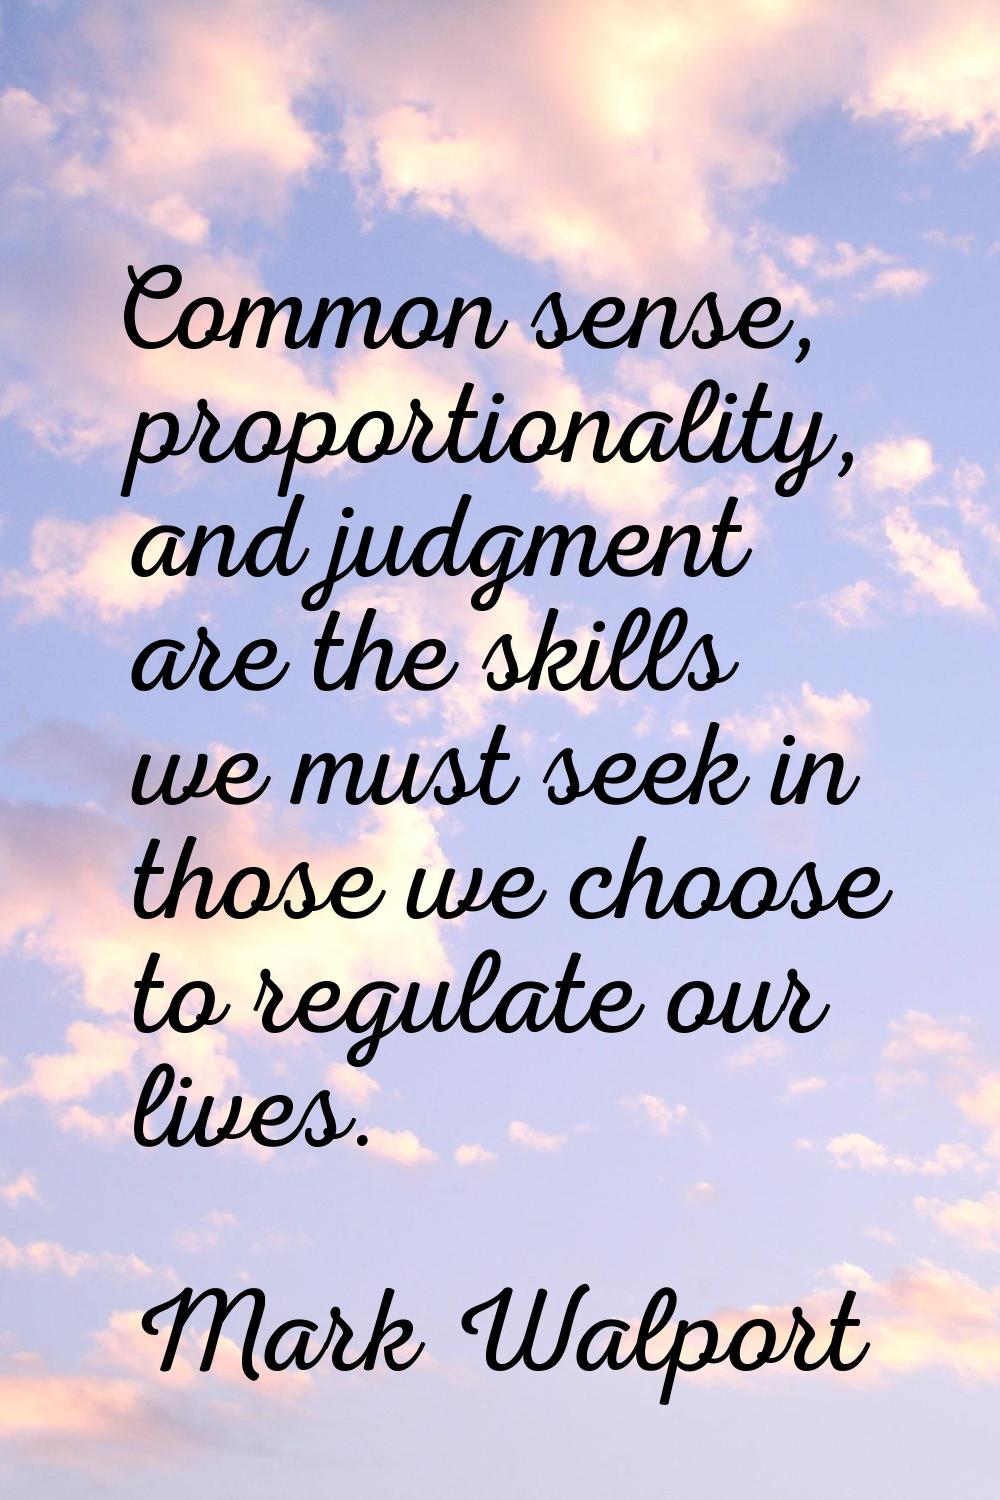 Common sense, proportionality, and judgment are the skills we must seek in those we choose to regul